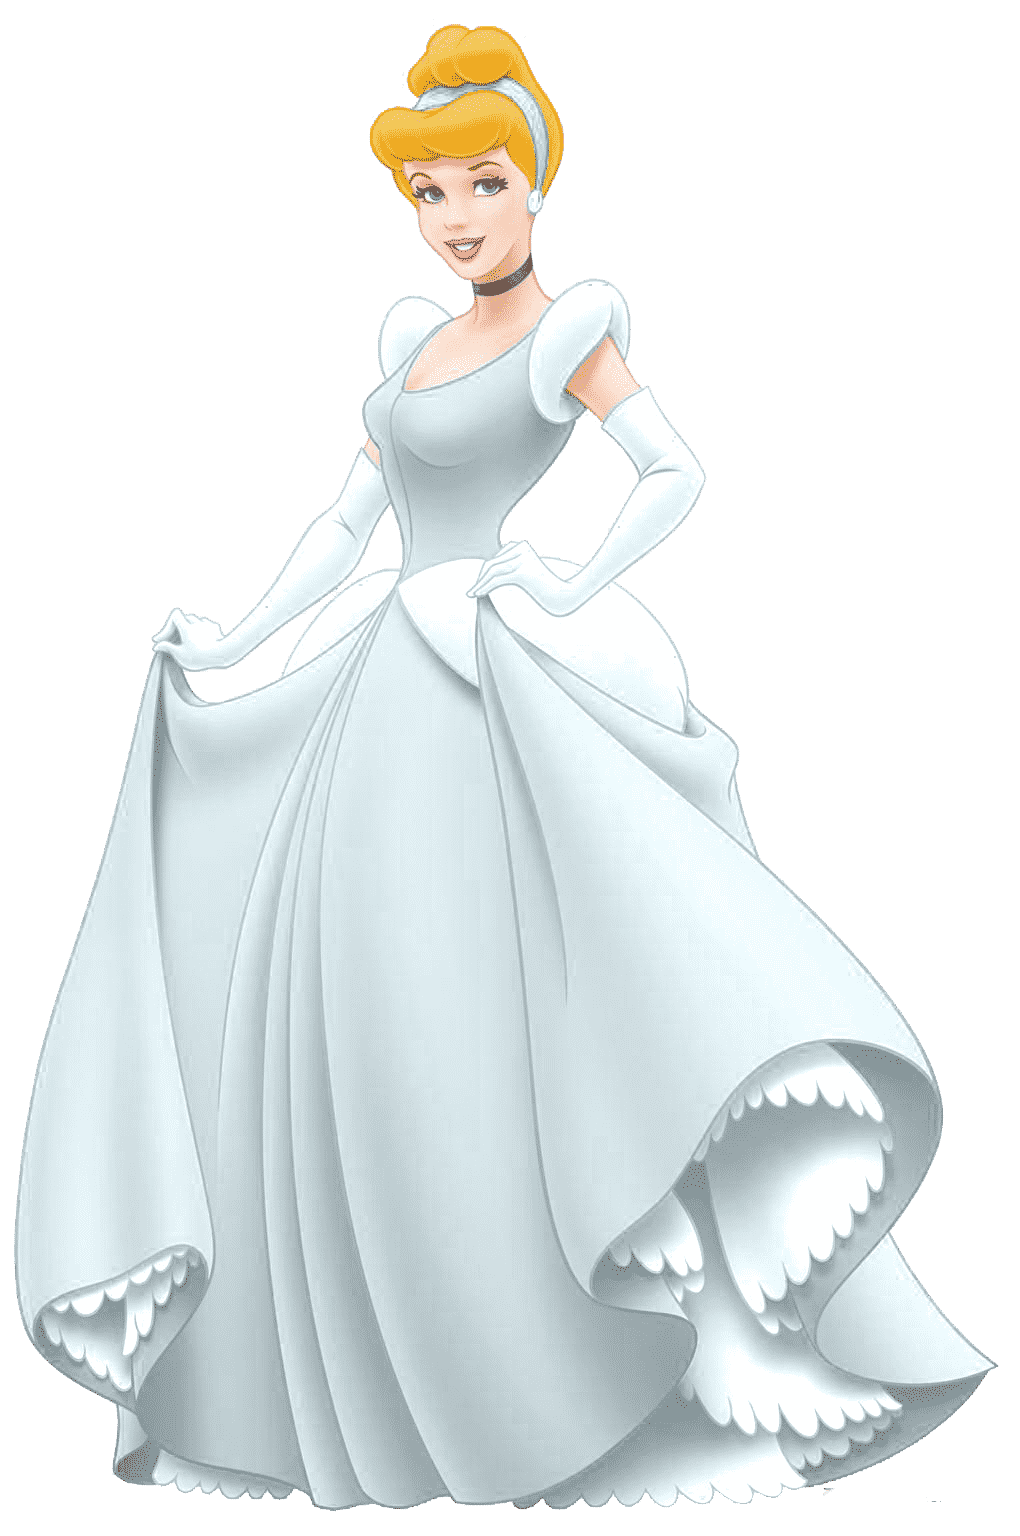 cinderella-blended-family-example